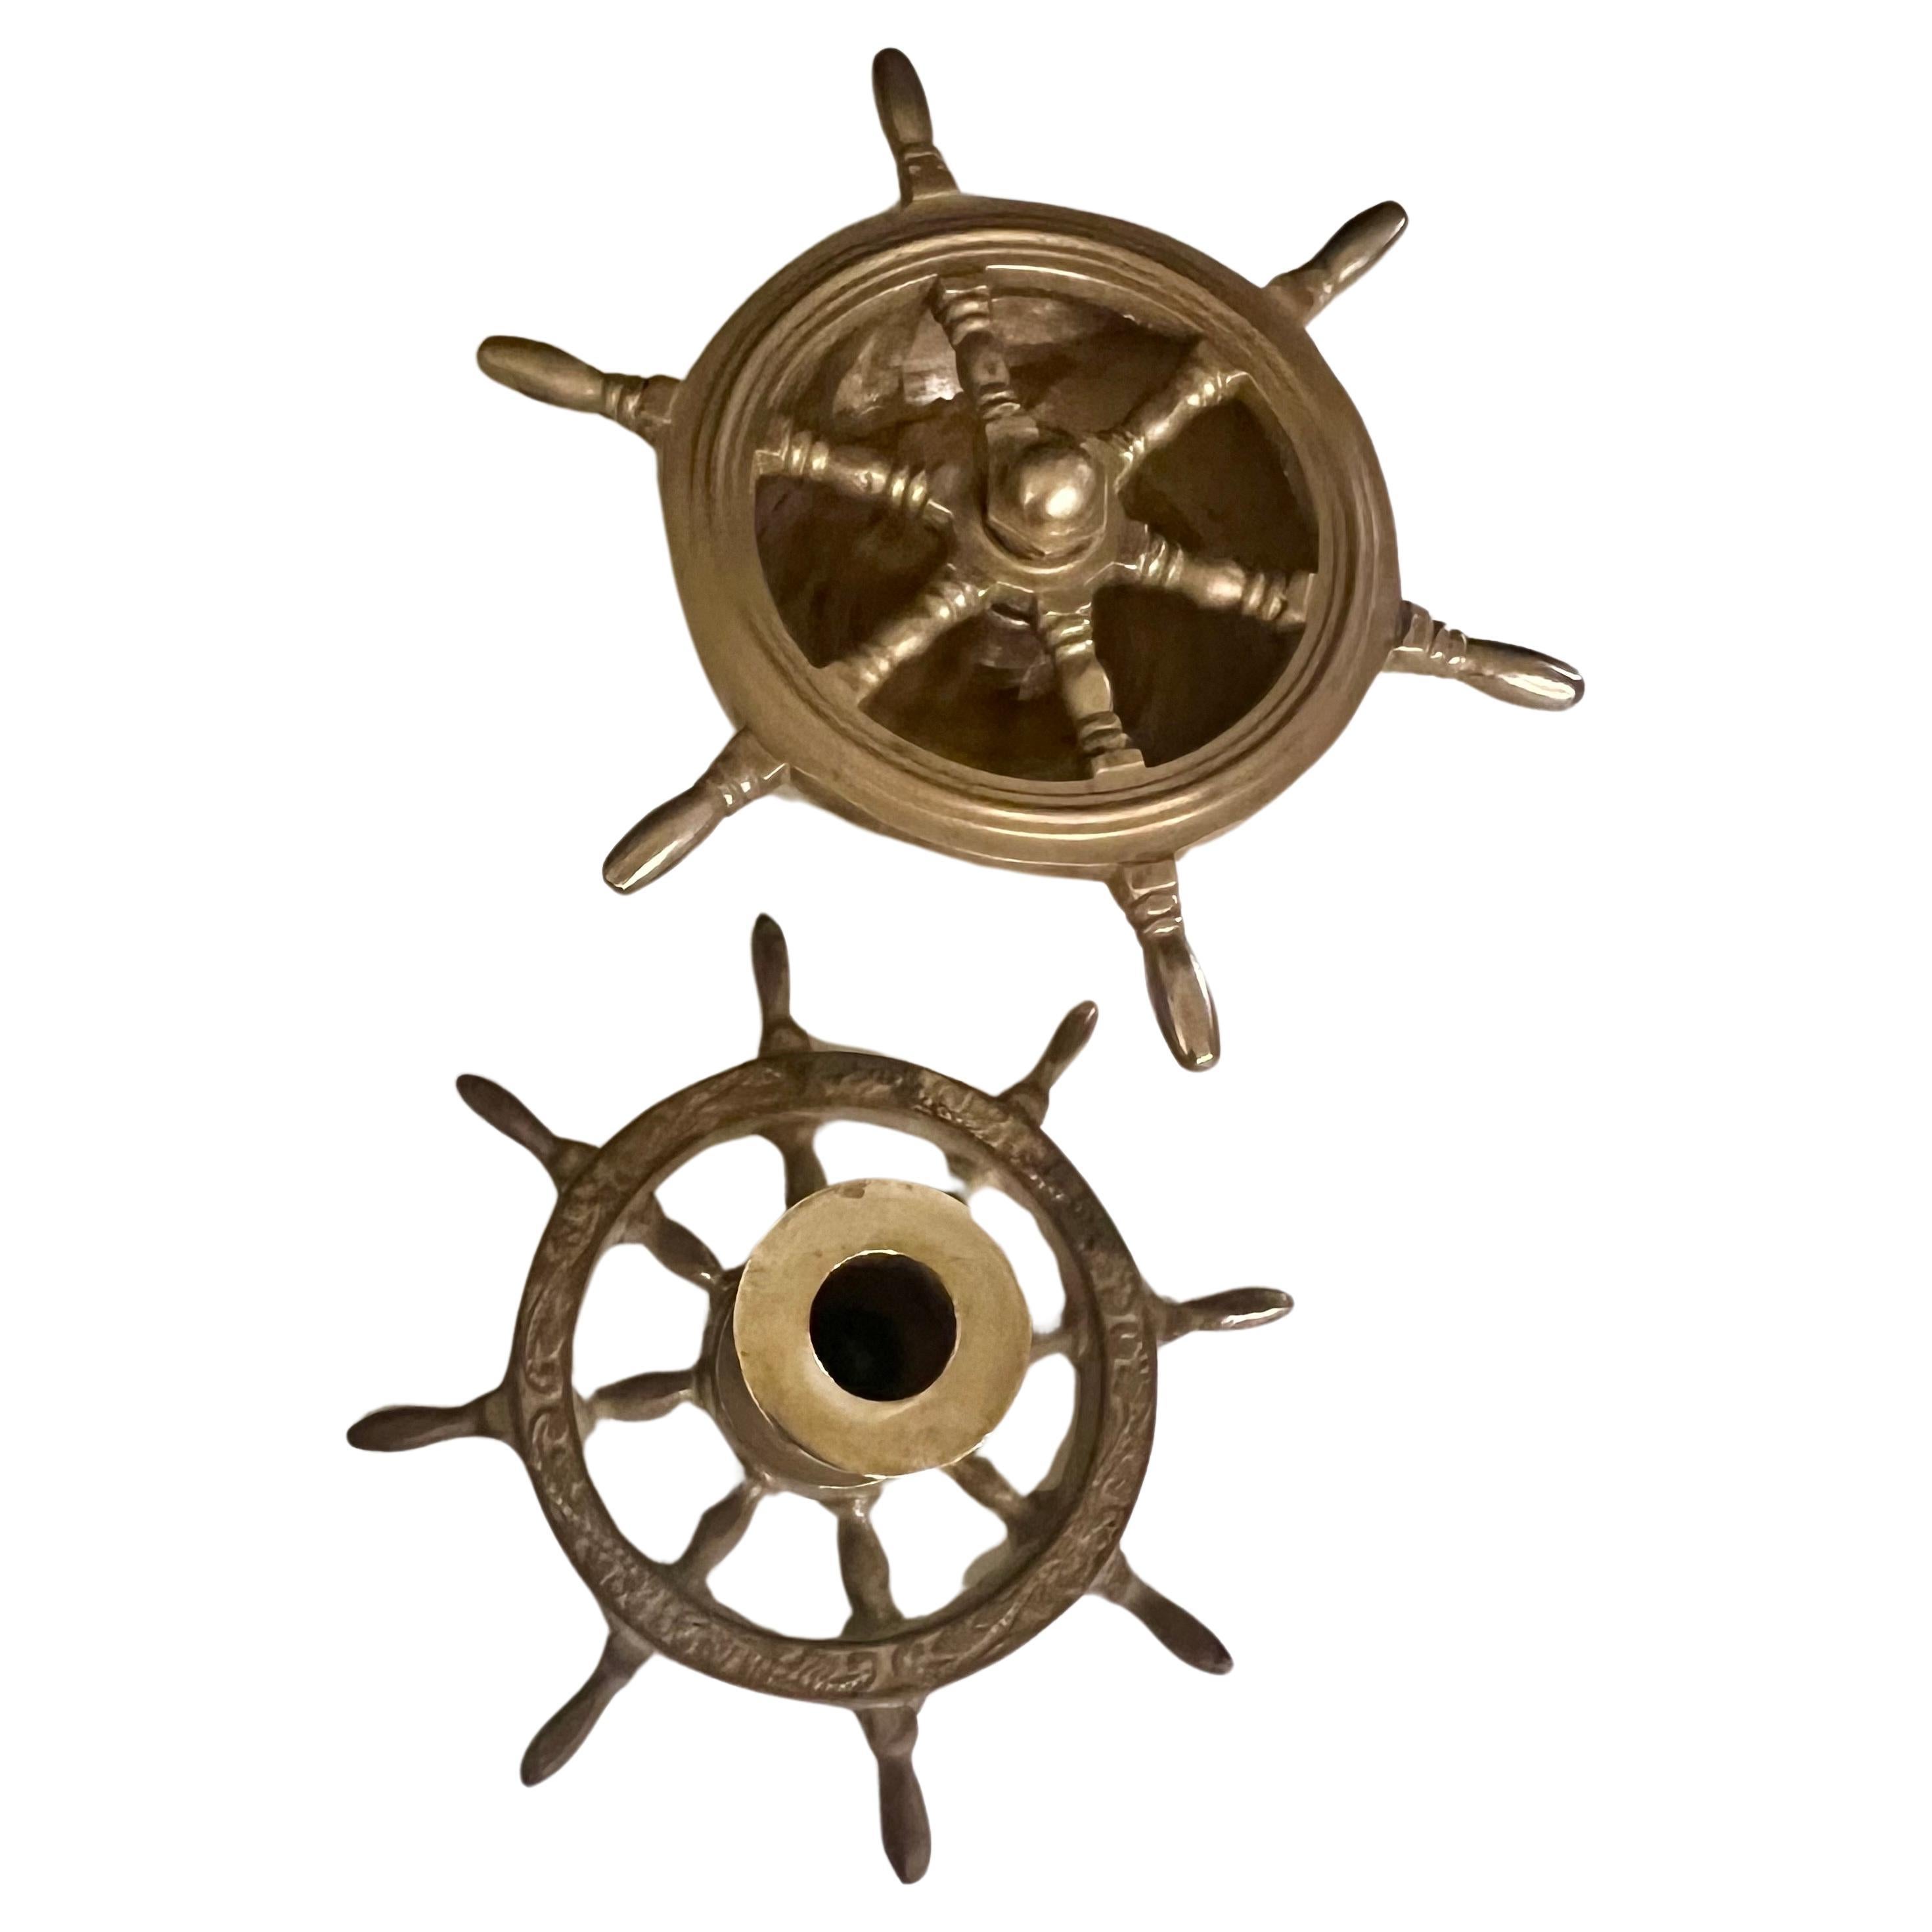 Whimsical Solid Brass Nautical Candle Holder & Ashtray Steering Wheel In Good Condition For Sale In San Diego, CA